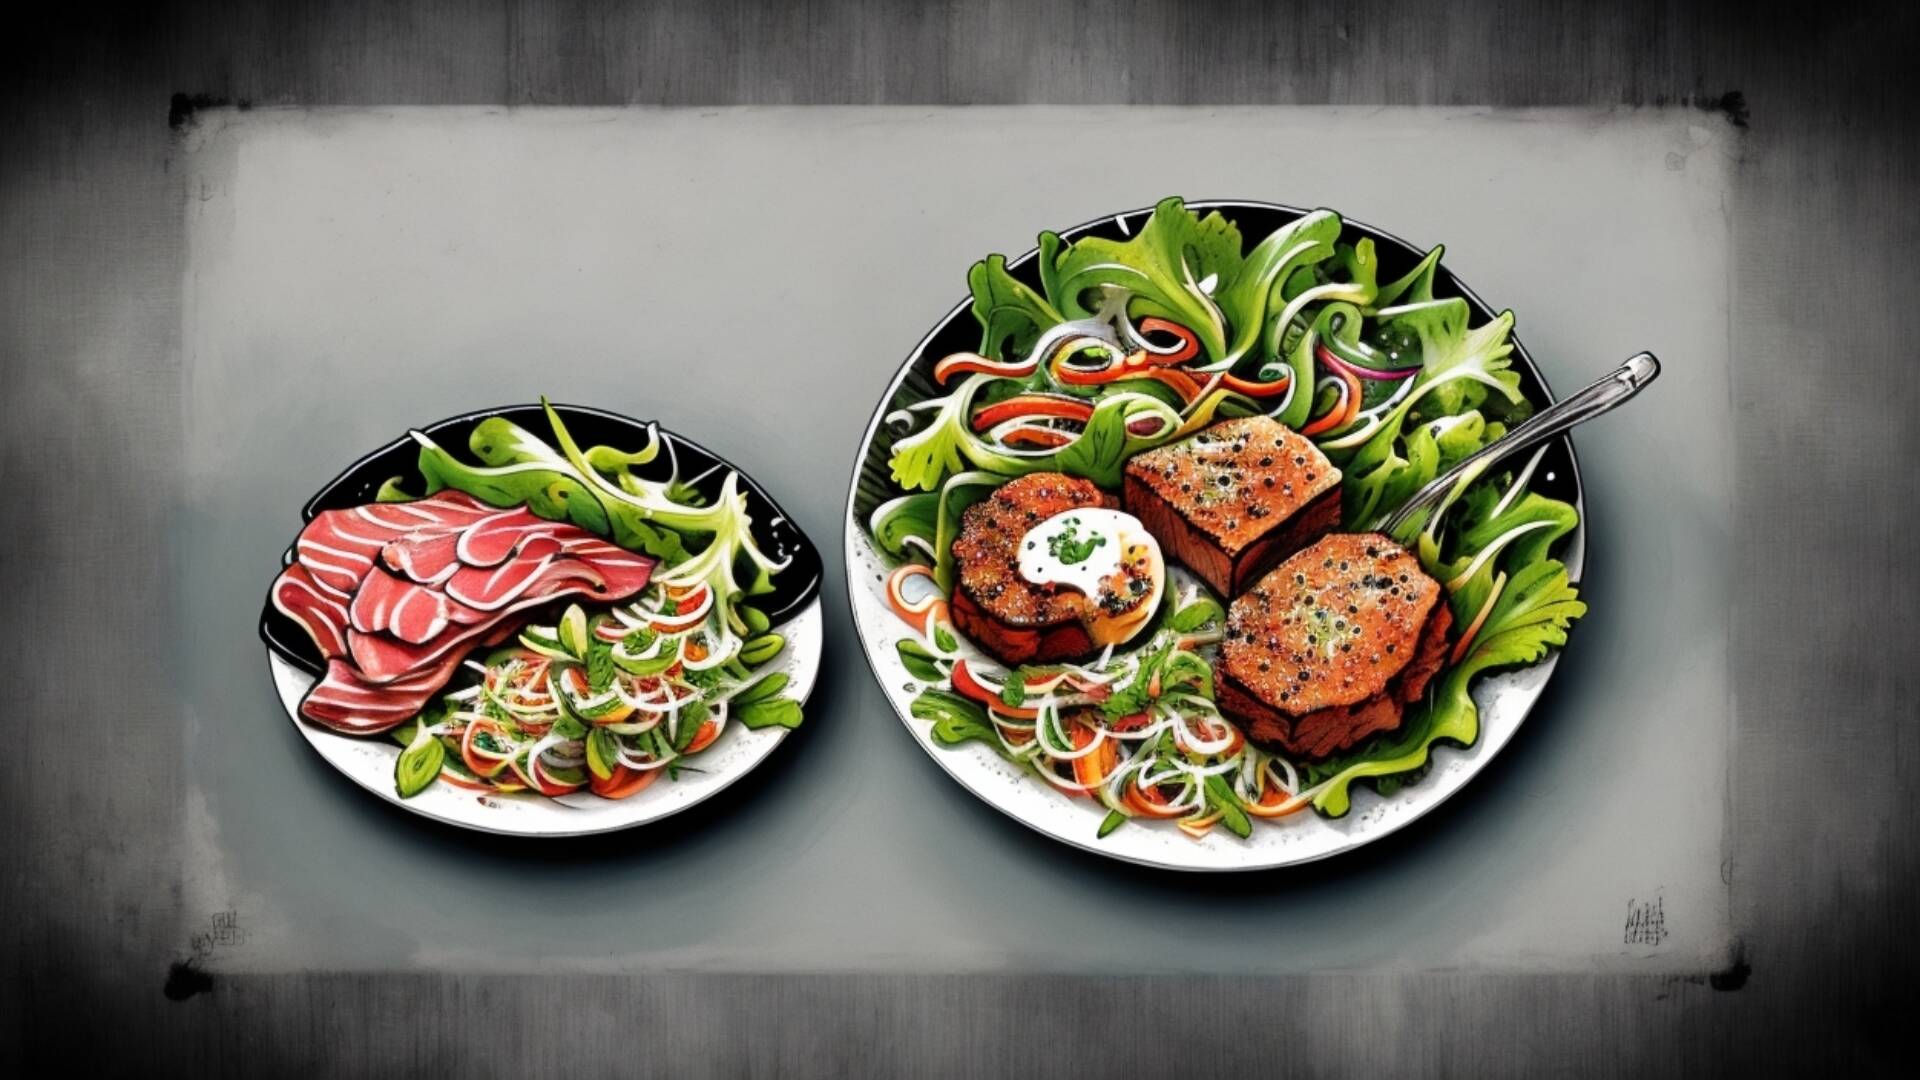 Default A Plate Of Food With Meat And Salad Comic Book Illustr 0